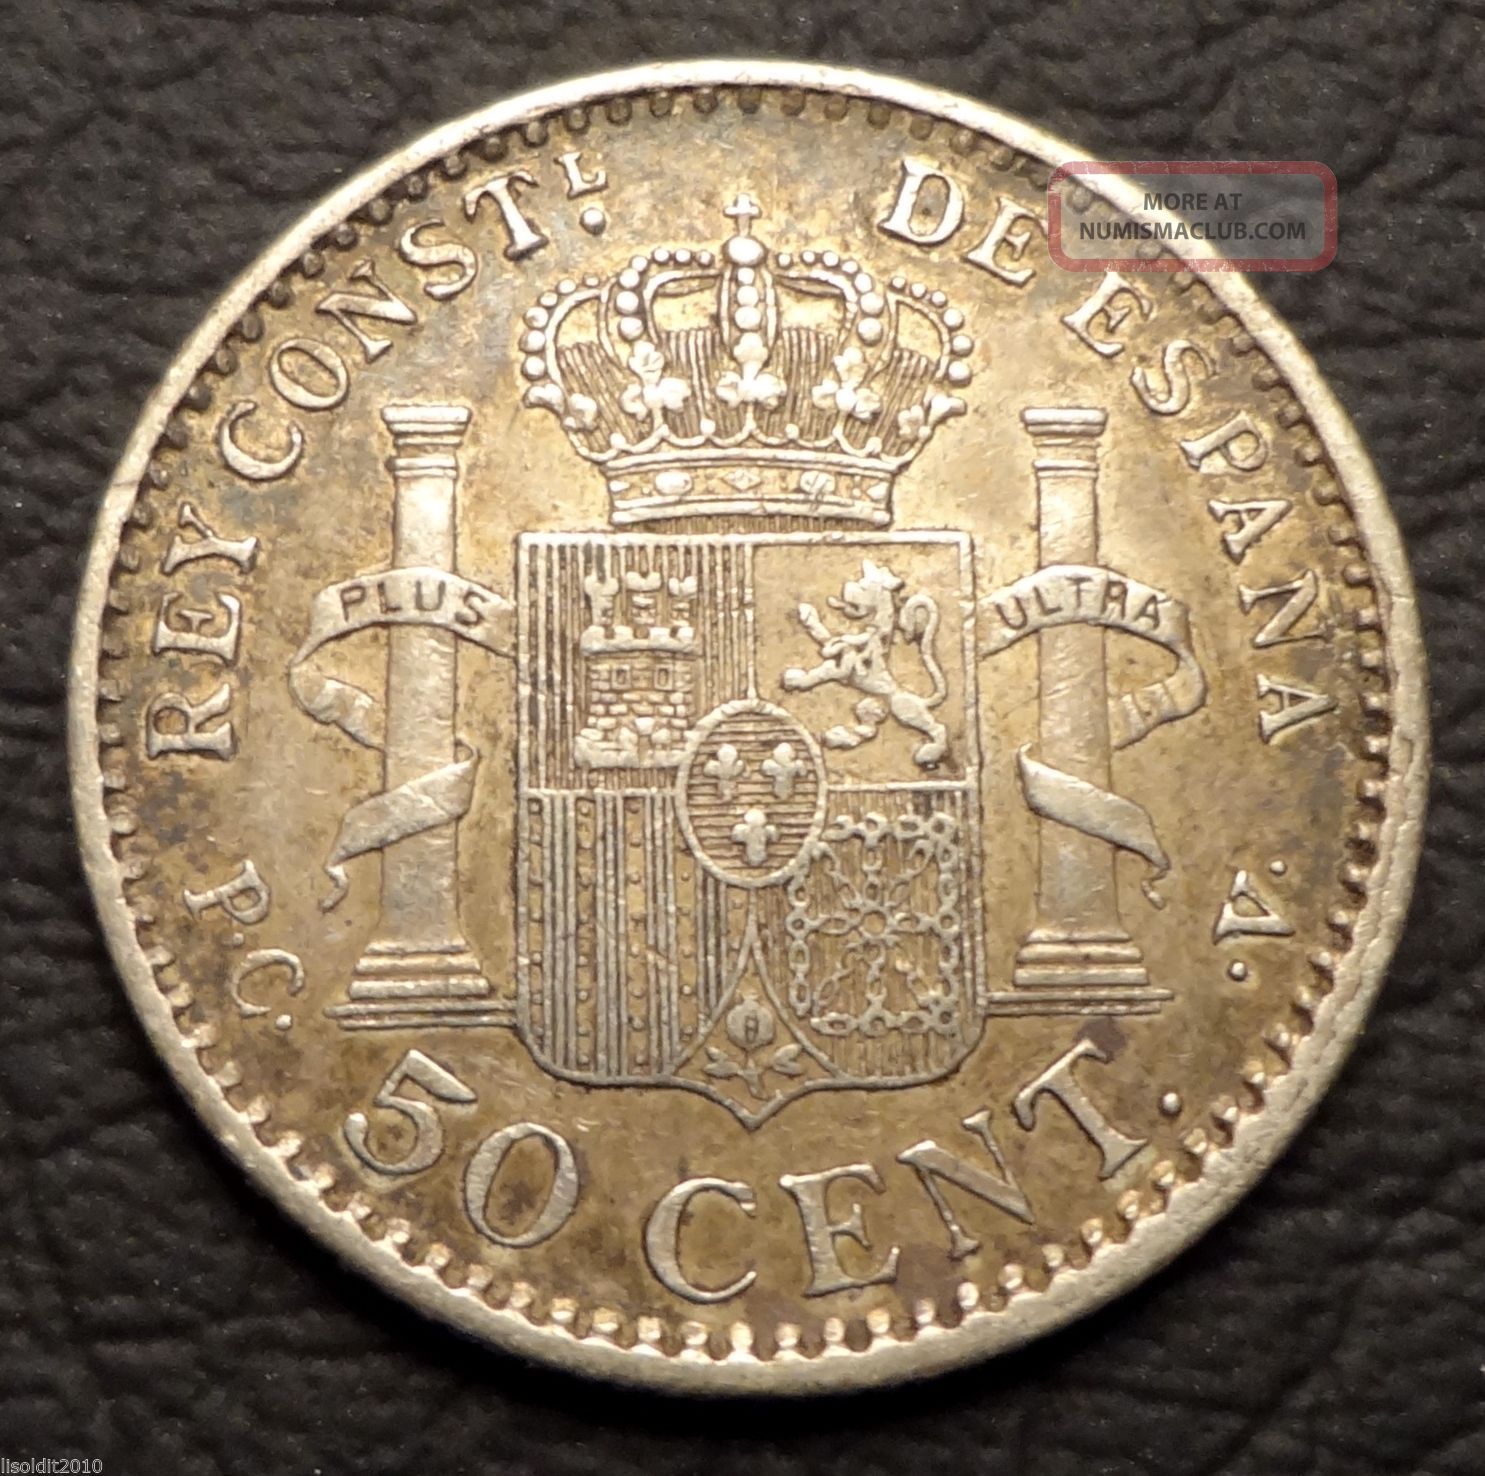 Spain 1910 Pc - V 50 Centimos Alfonso Xiii Silver Coin High Detail & Patina